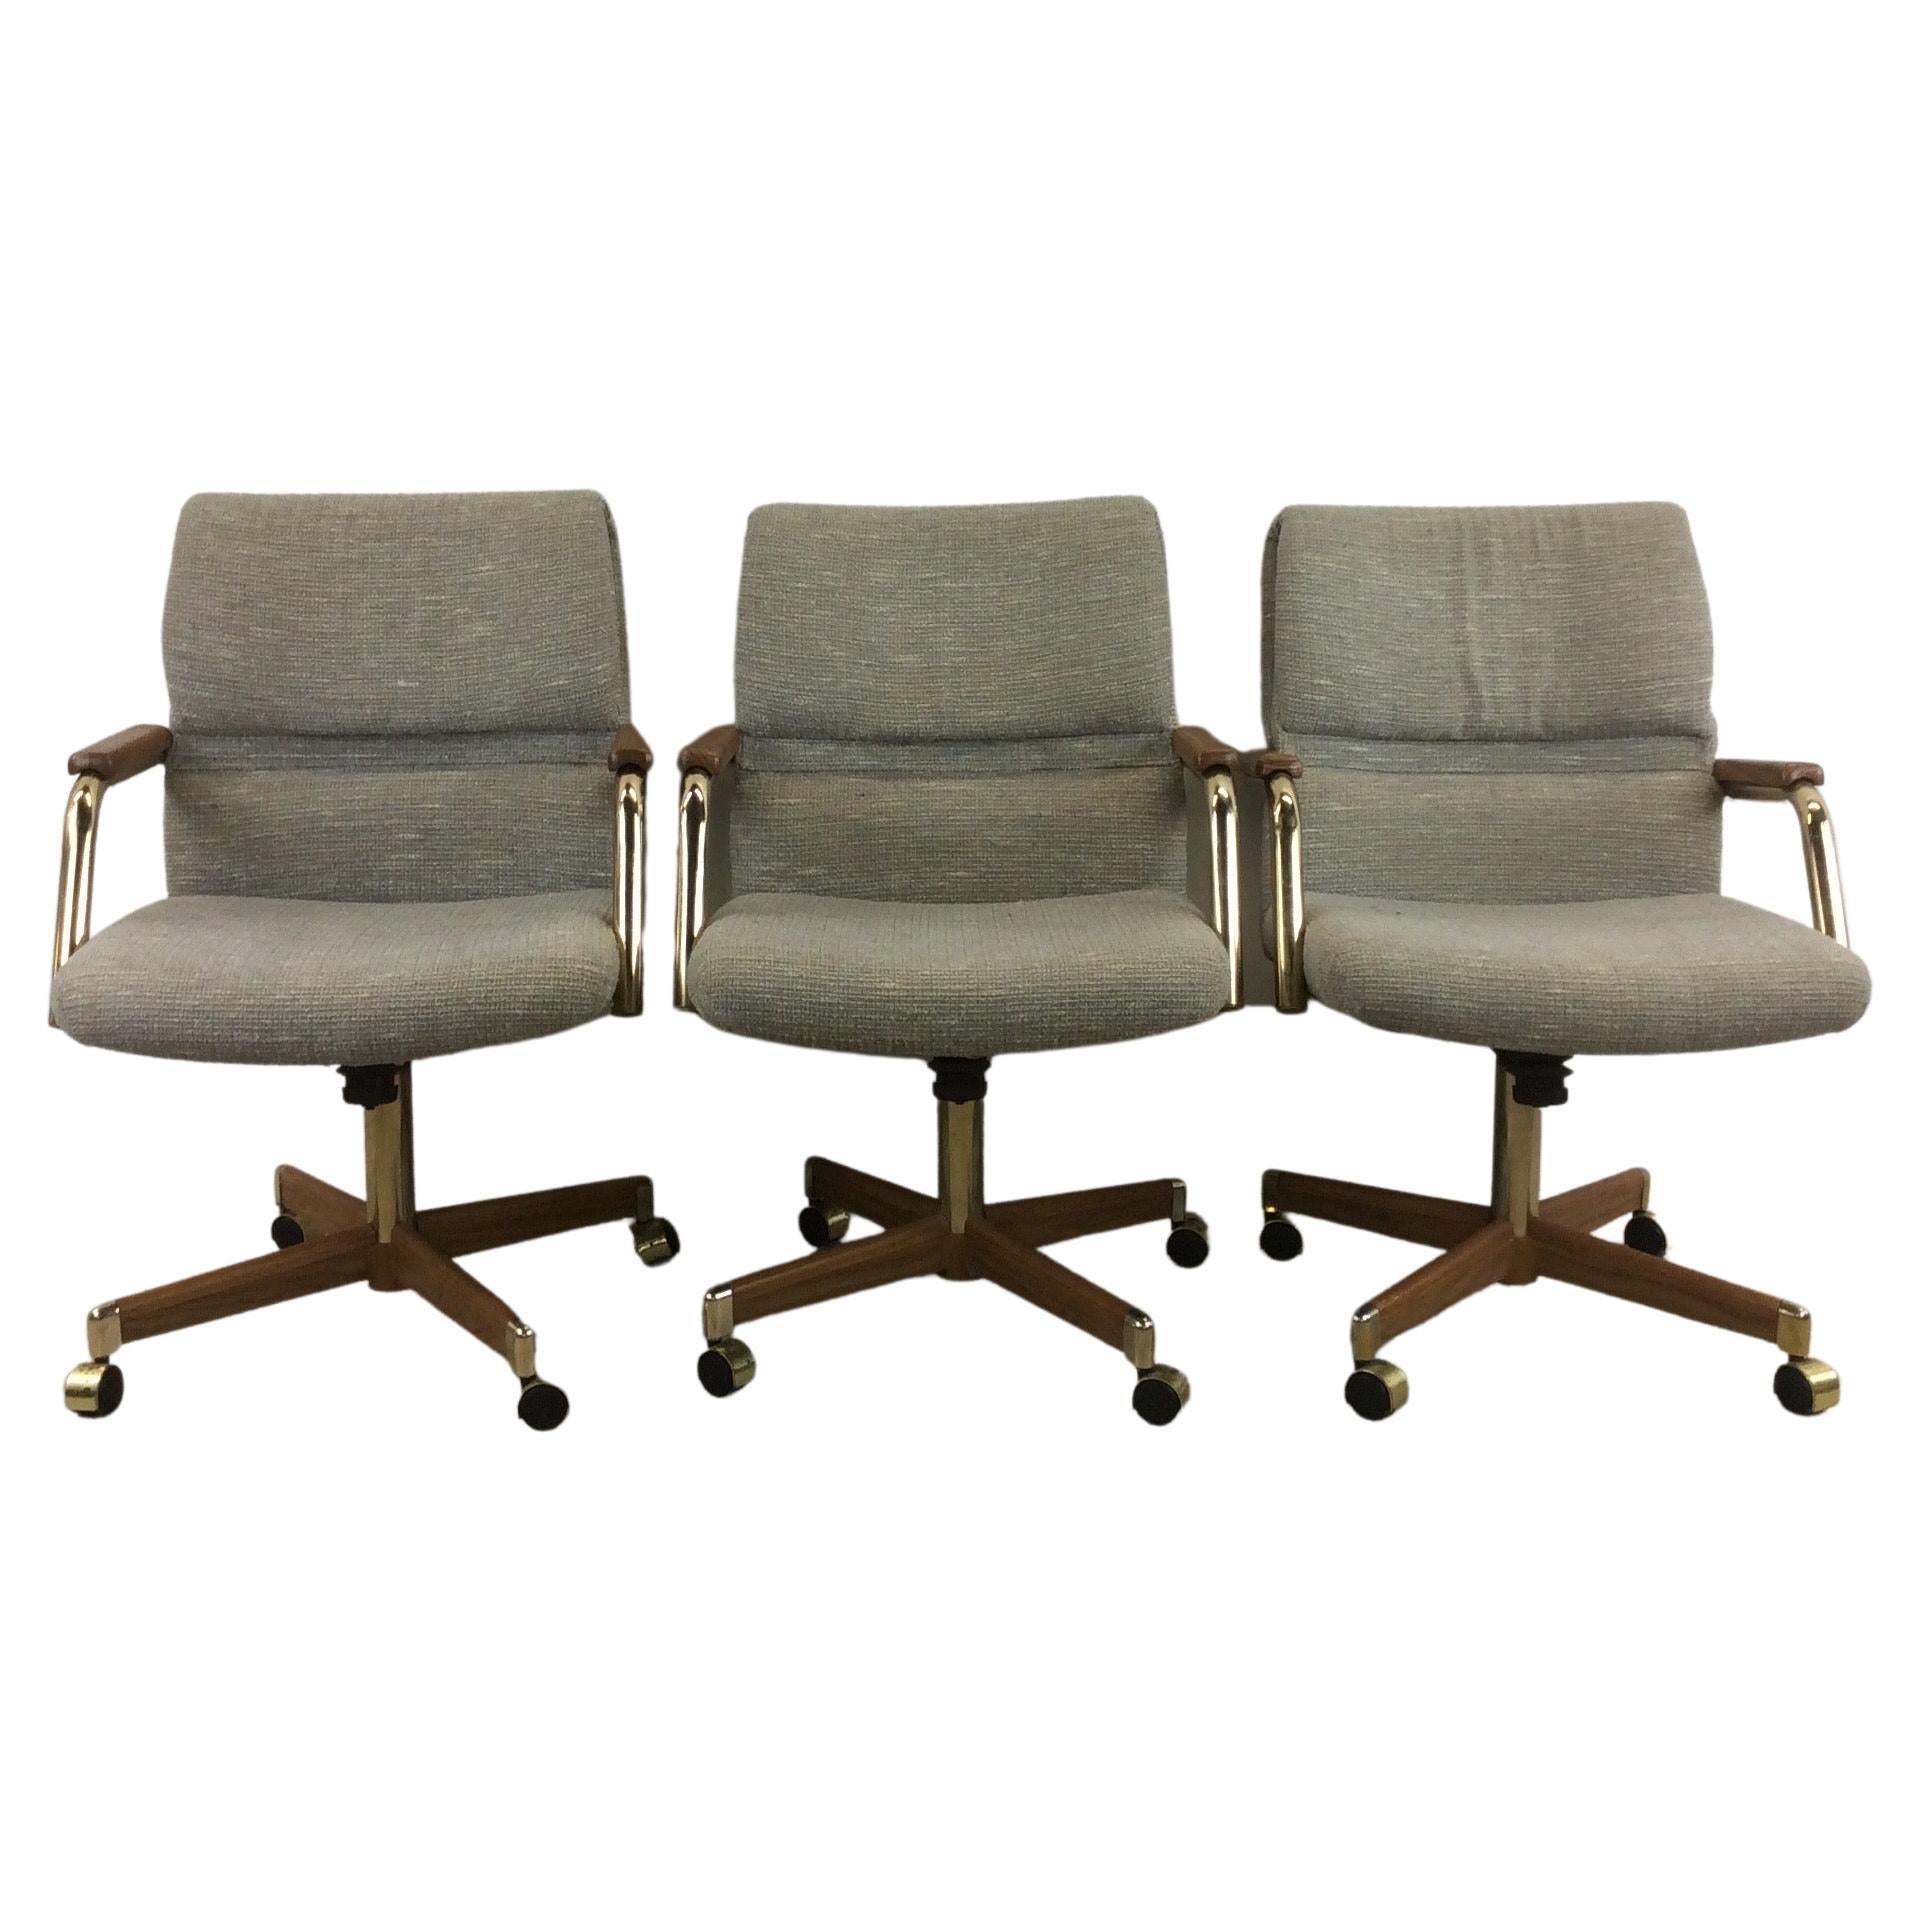 Set of 3 Postmodern Upholstered Chairs with Wheeled Base